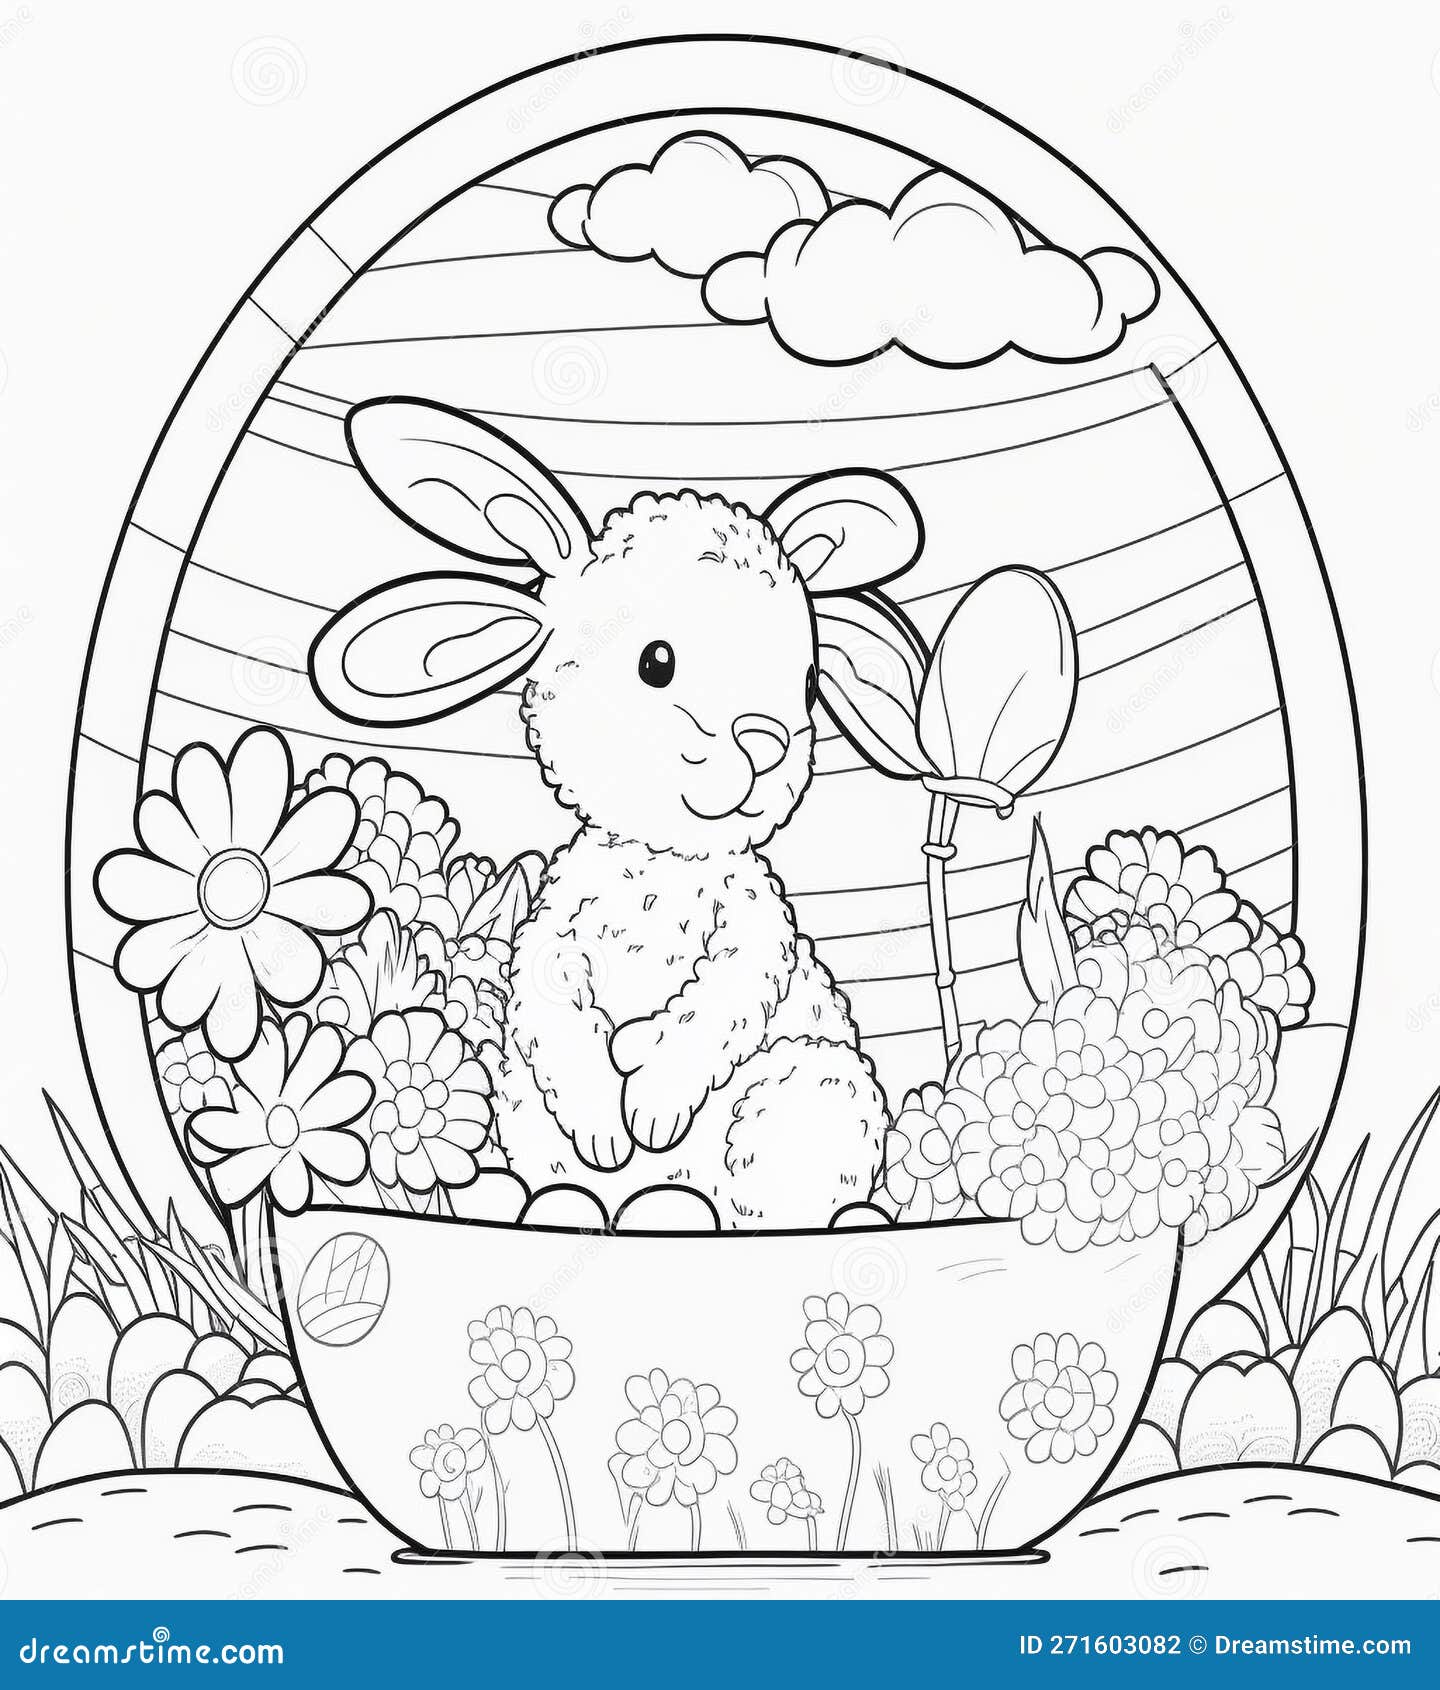 Coloring for kids printable coloring page easter school hobby portrait format drawn bunny eggs white background stock illustration